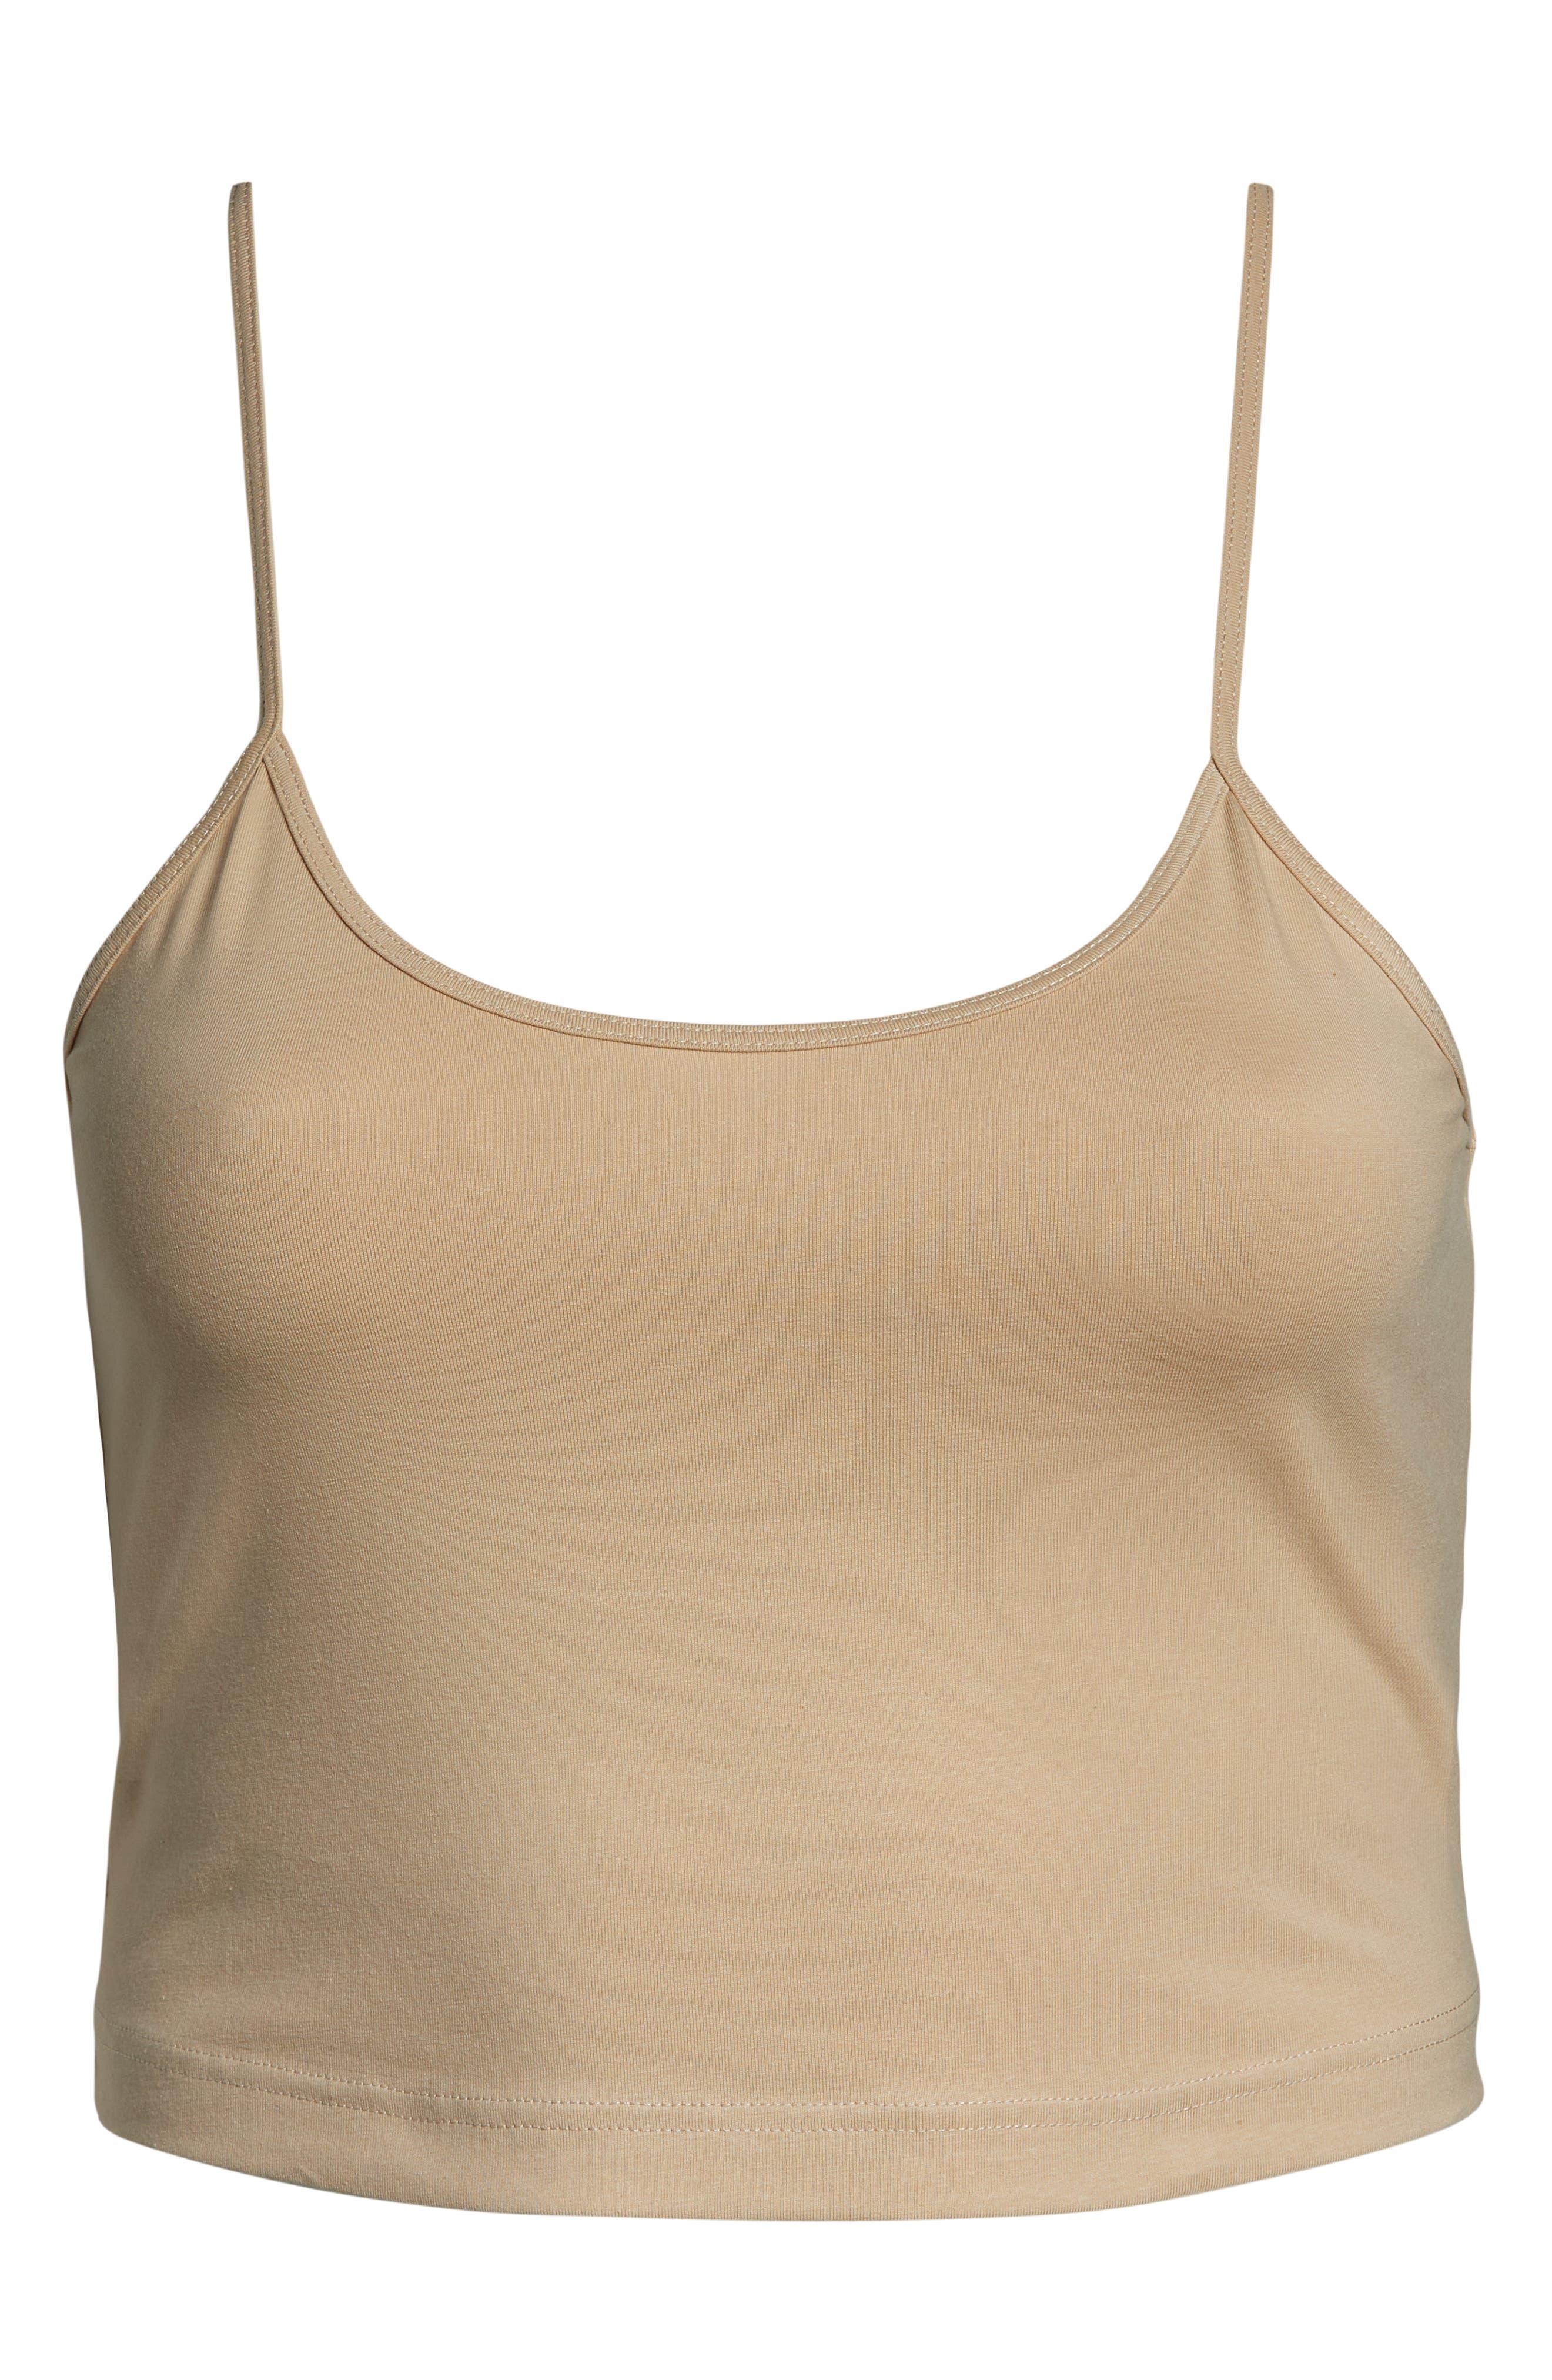 BP. Knit Organic Cotton Crop Camisole In Tan Doeskin At Nordstrom